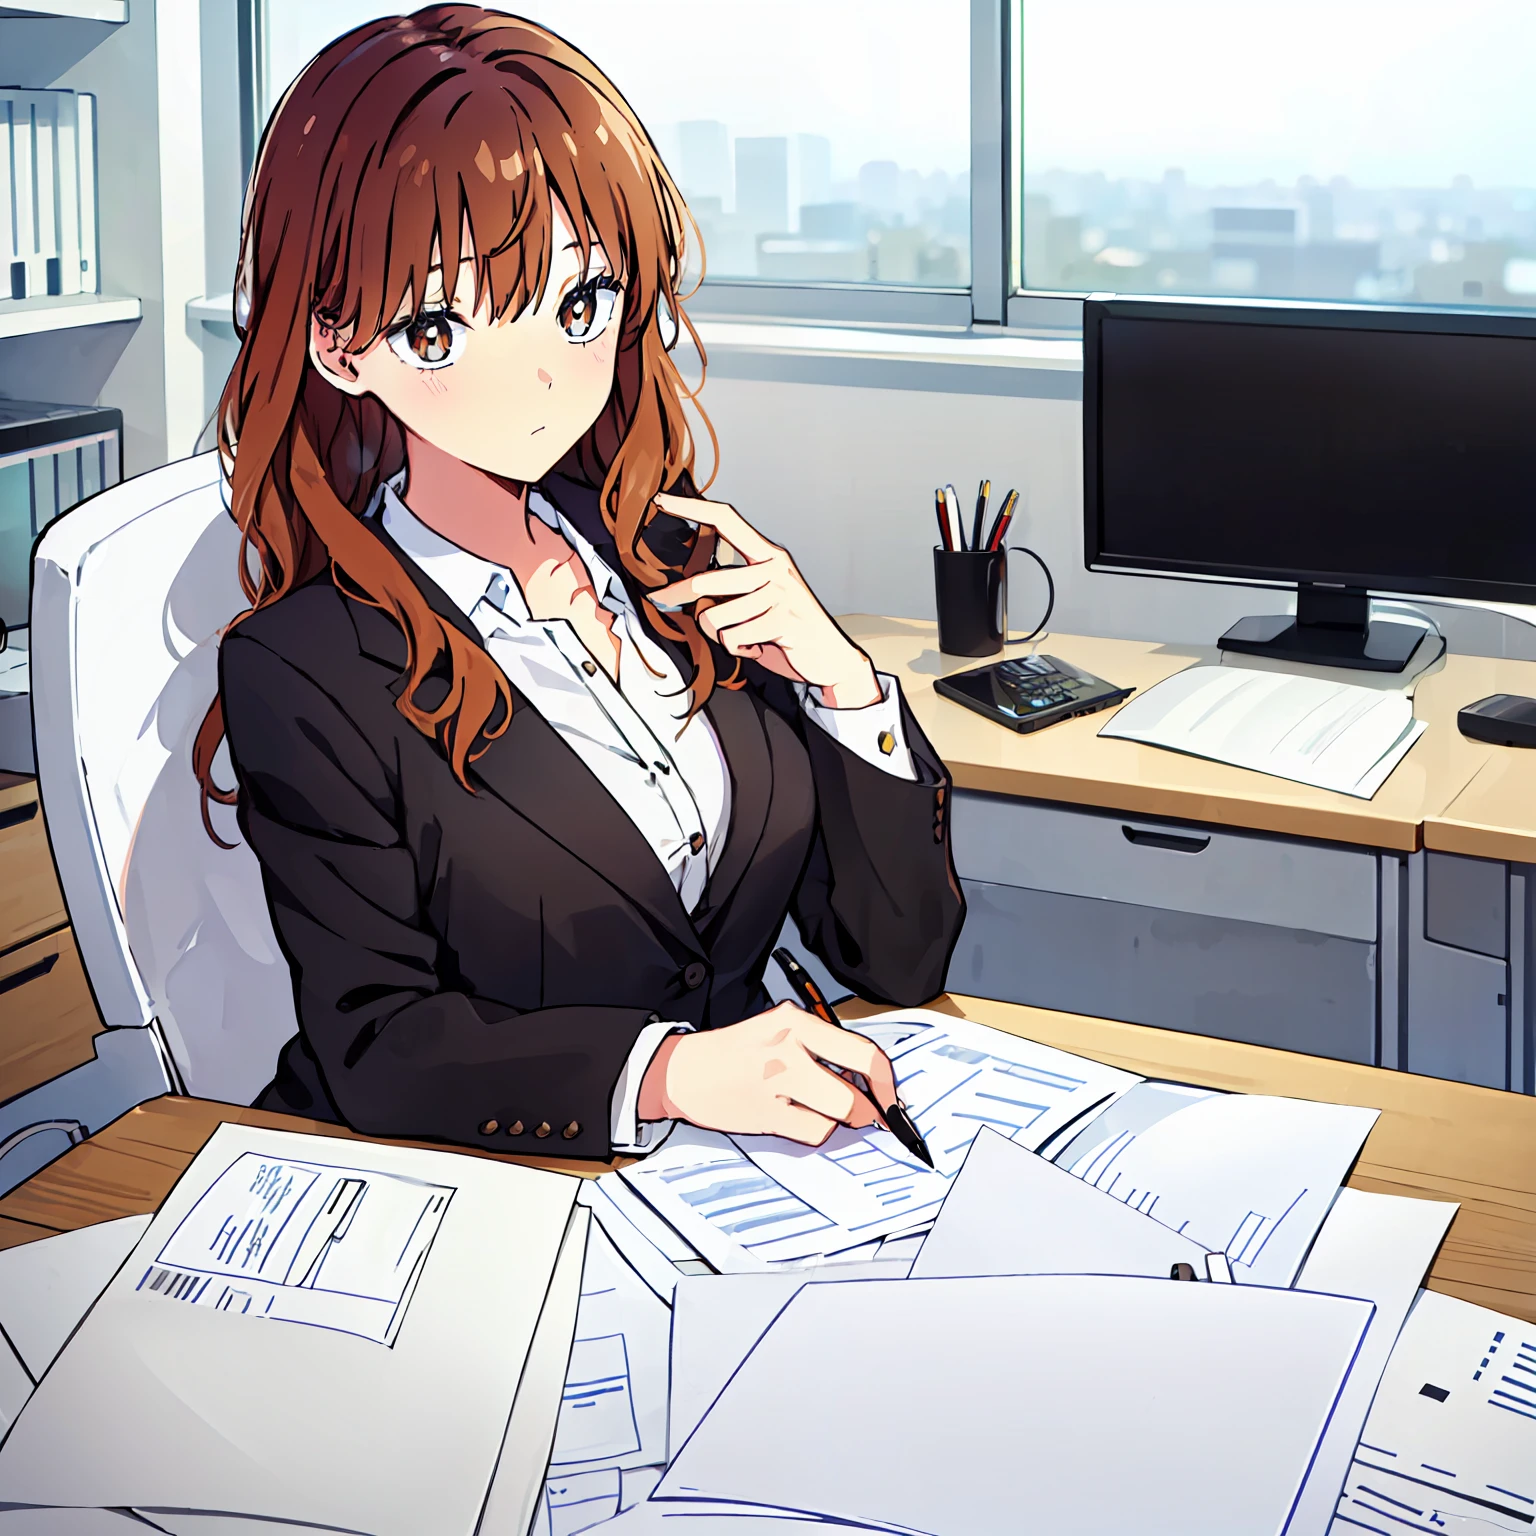 1 girl, long hair, brown hair, wavy upper-back length, brown eyes, black blazer, grey blouse, white pantyhouse, inside office, on top office desk, computer, smartphone, printers, papers, hold a pen in right hand, perfect finger shape